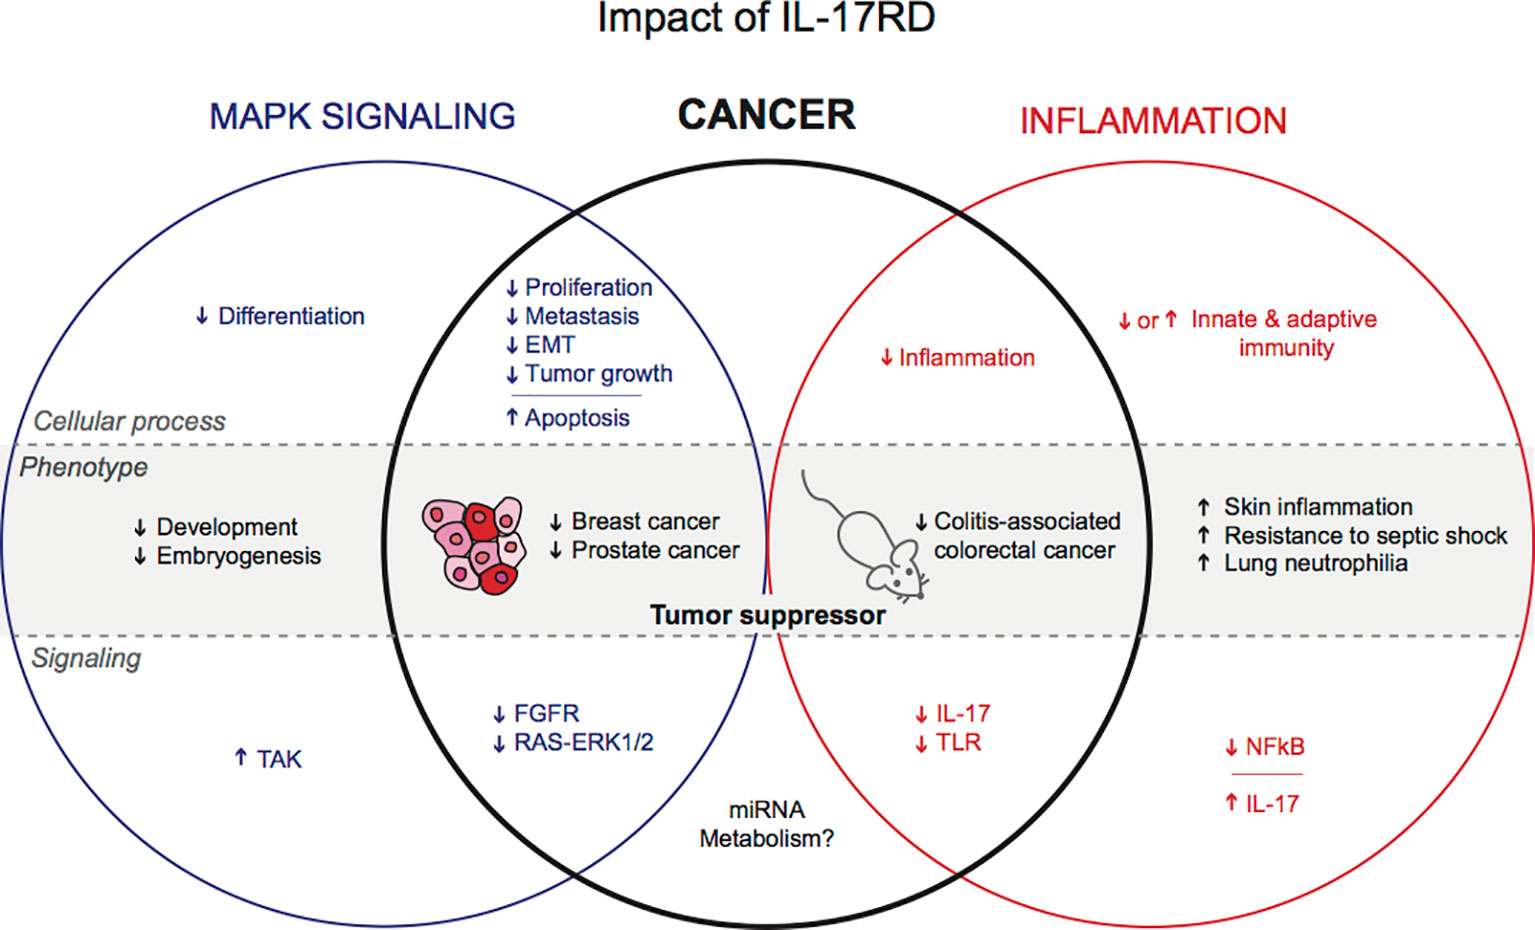 Postulated functions of IL-17RD in physiology and cancer.